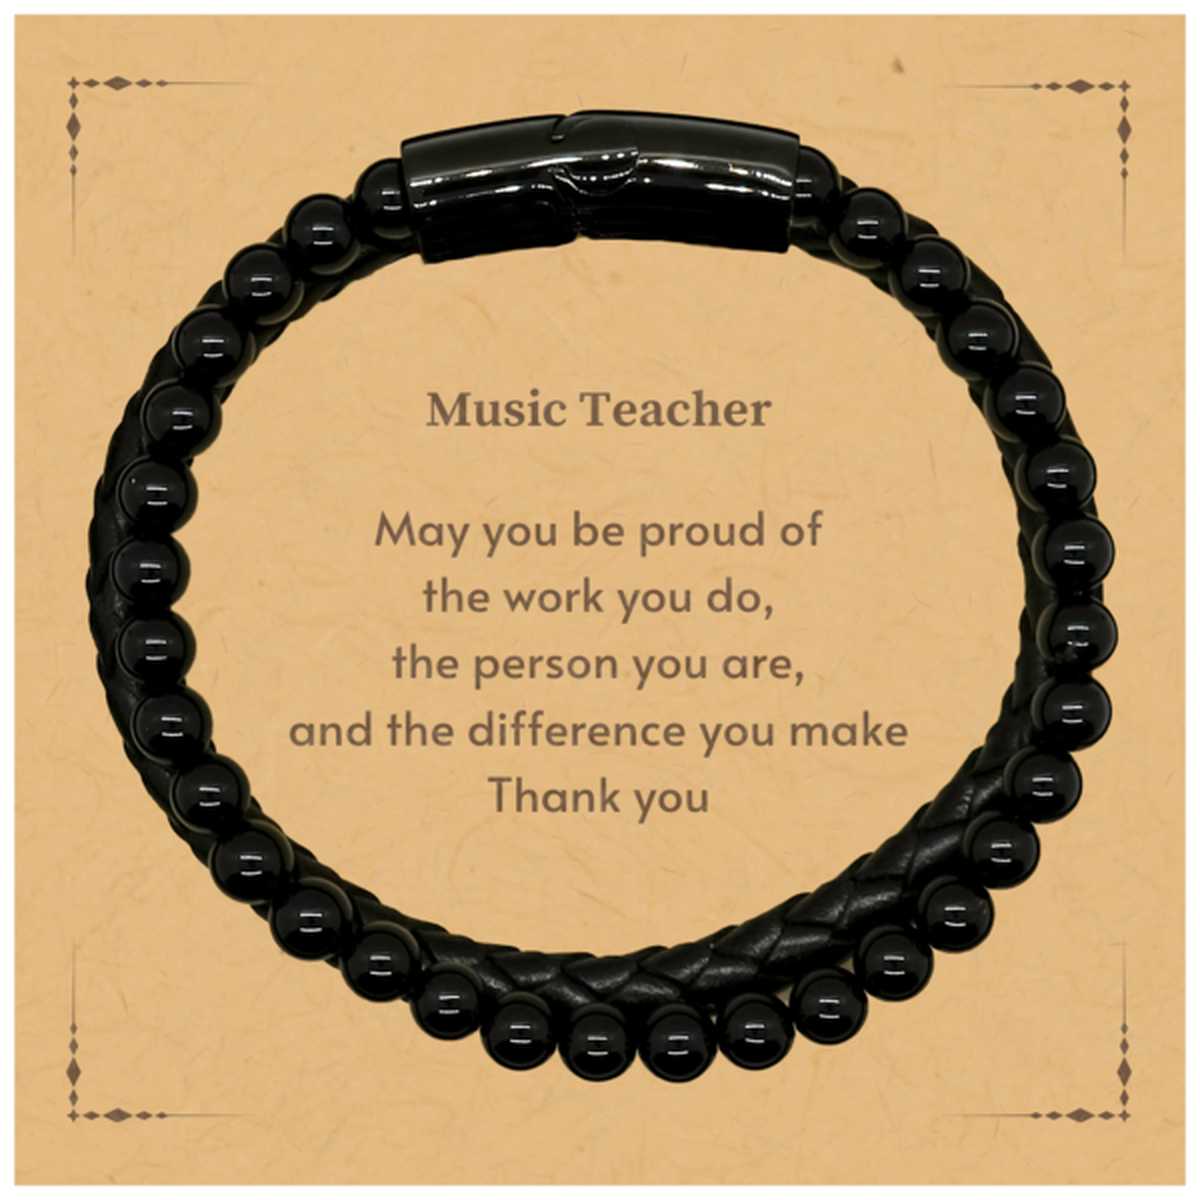 Heartwarming Stone Leather Bracelets Retirement Coworkers Gifts for Music Teacher, Music Teacher May You be proud of the work you do, the person you are Gifts for Boss Men Women Friends